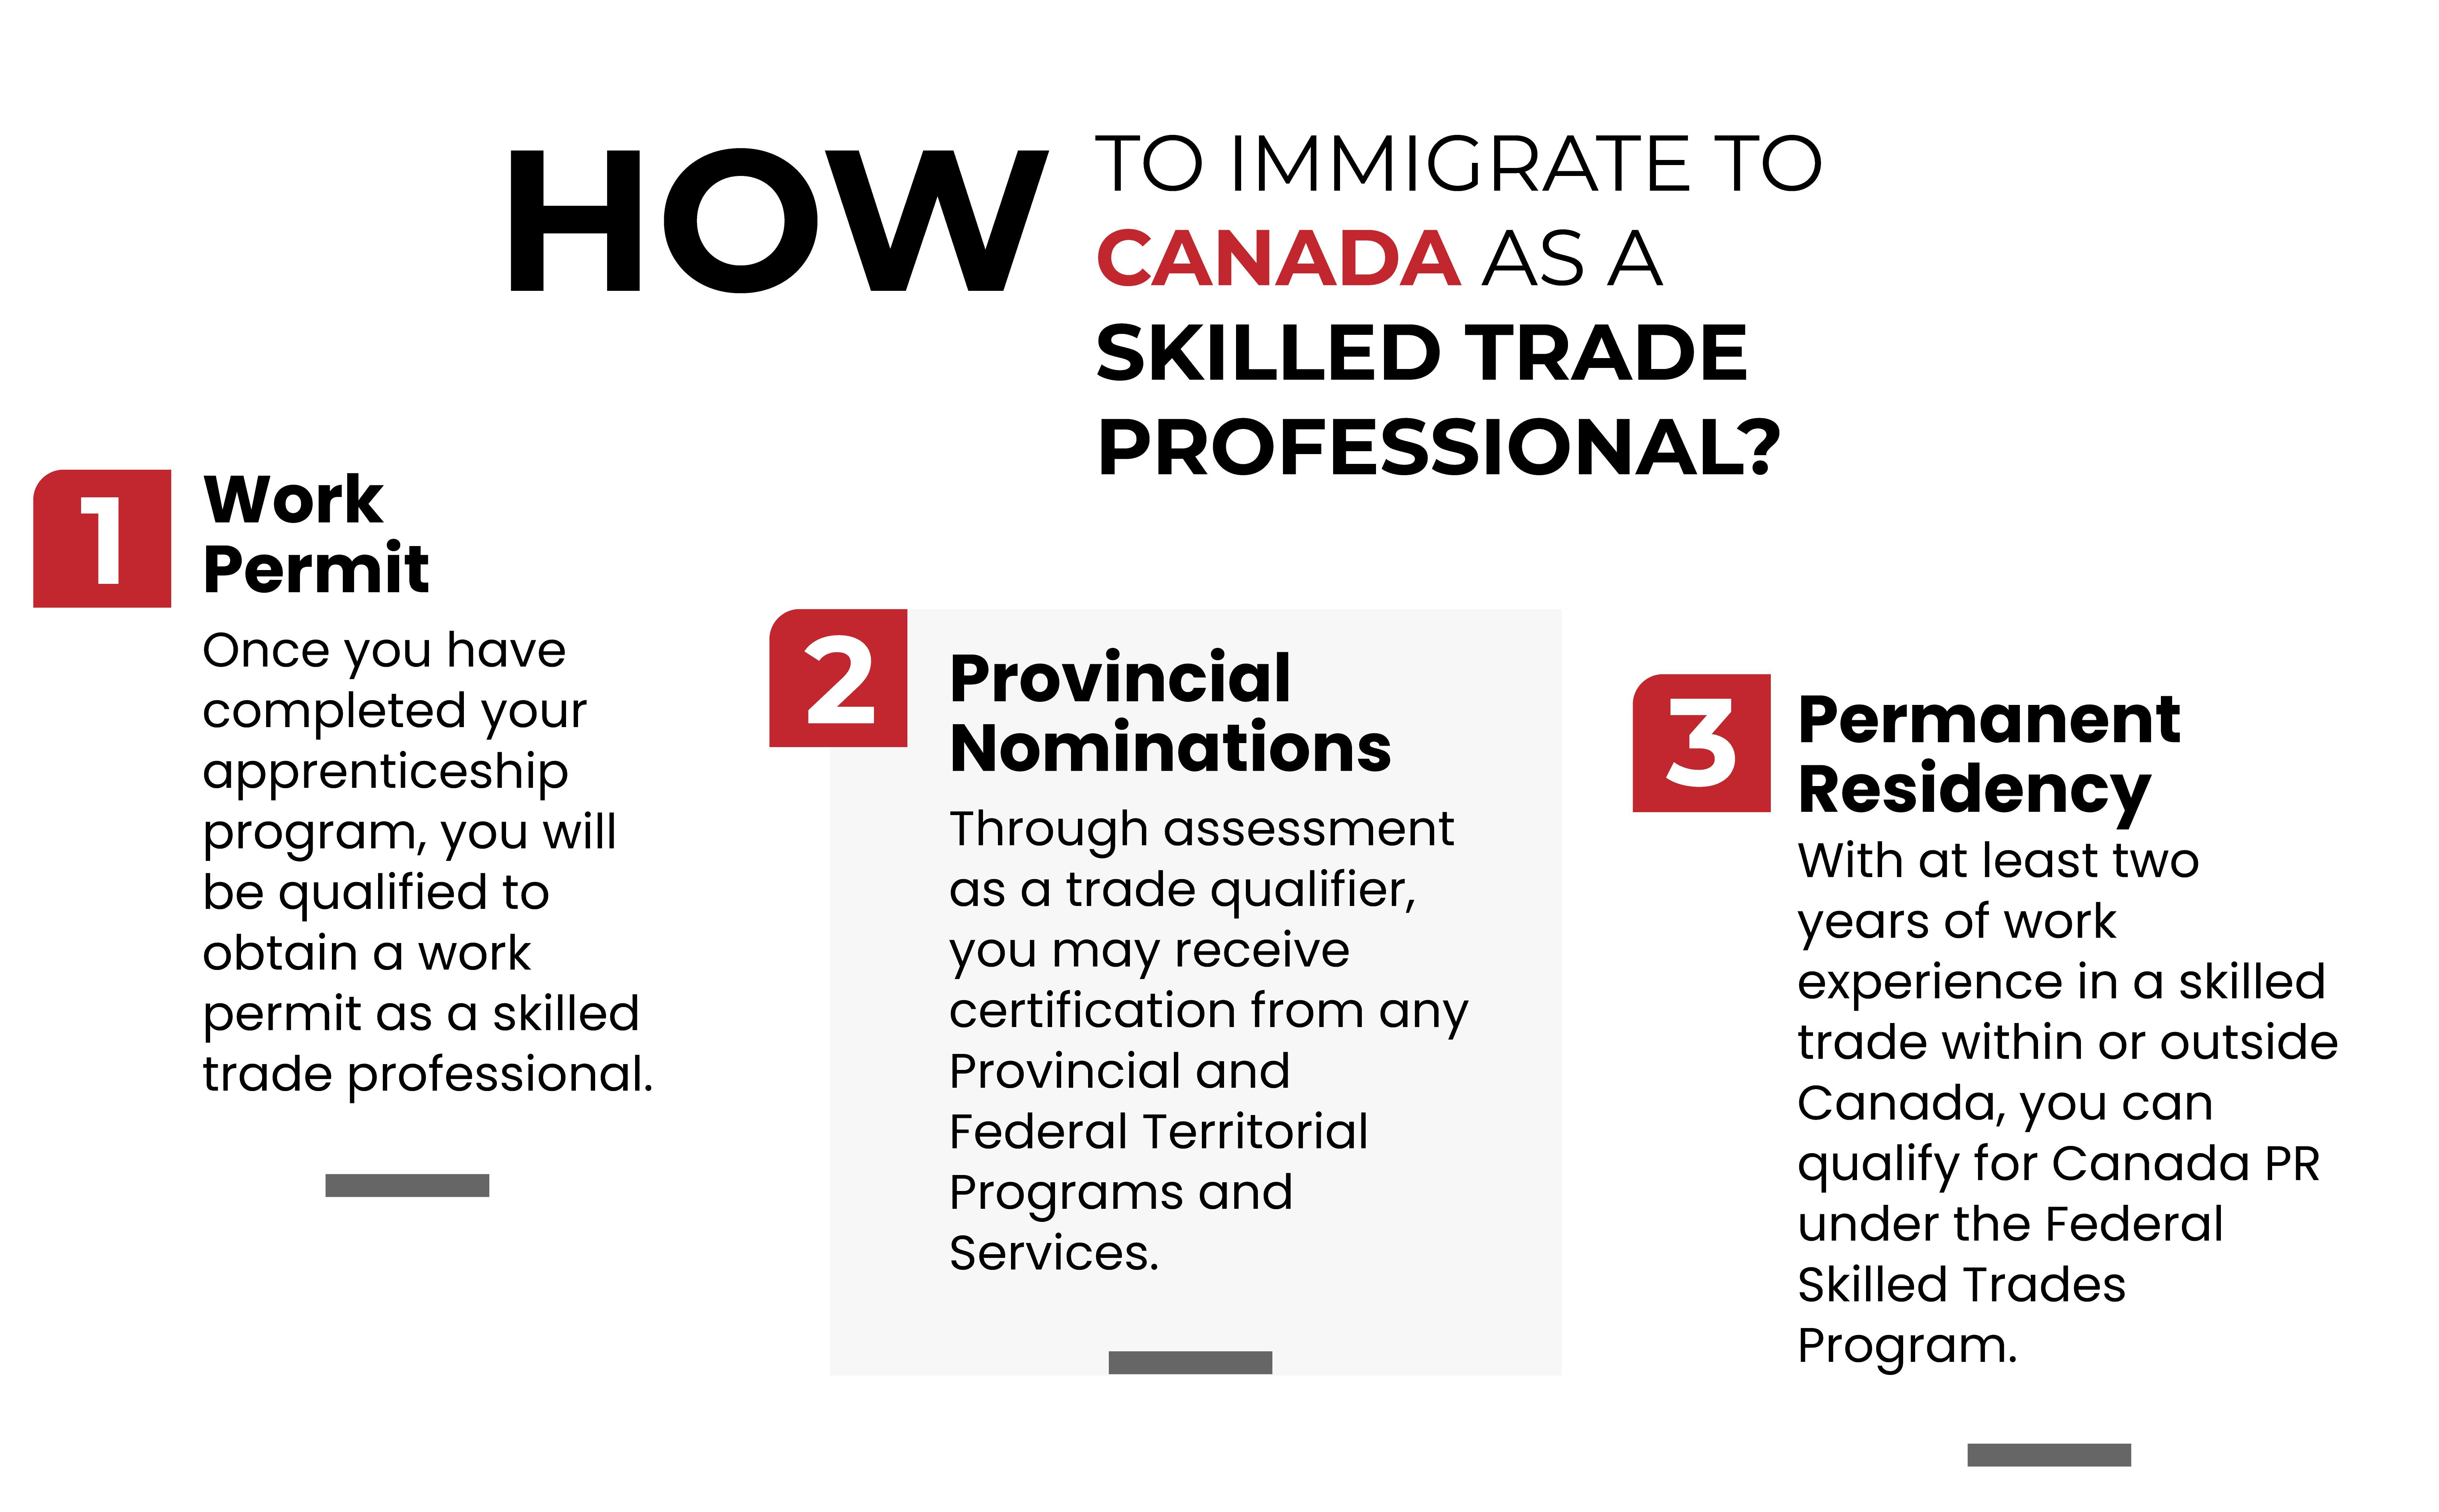 How to Immigrate to Canada as a Skilled Trade Professional